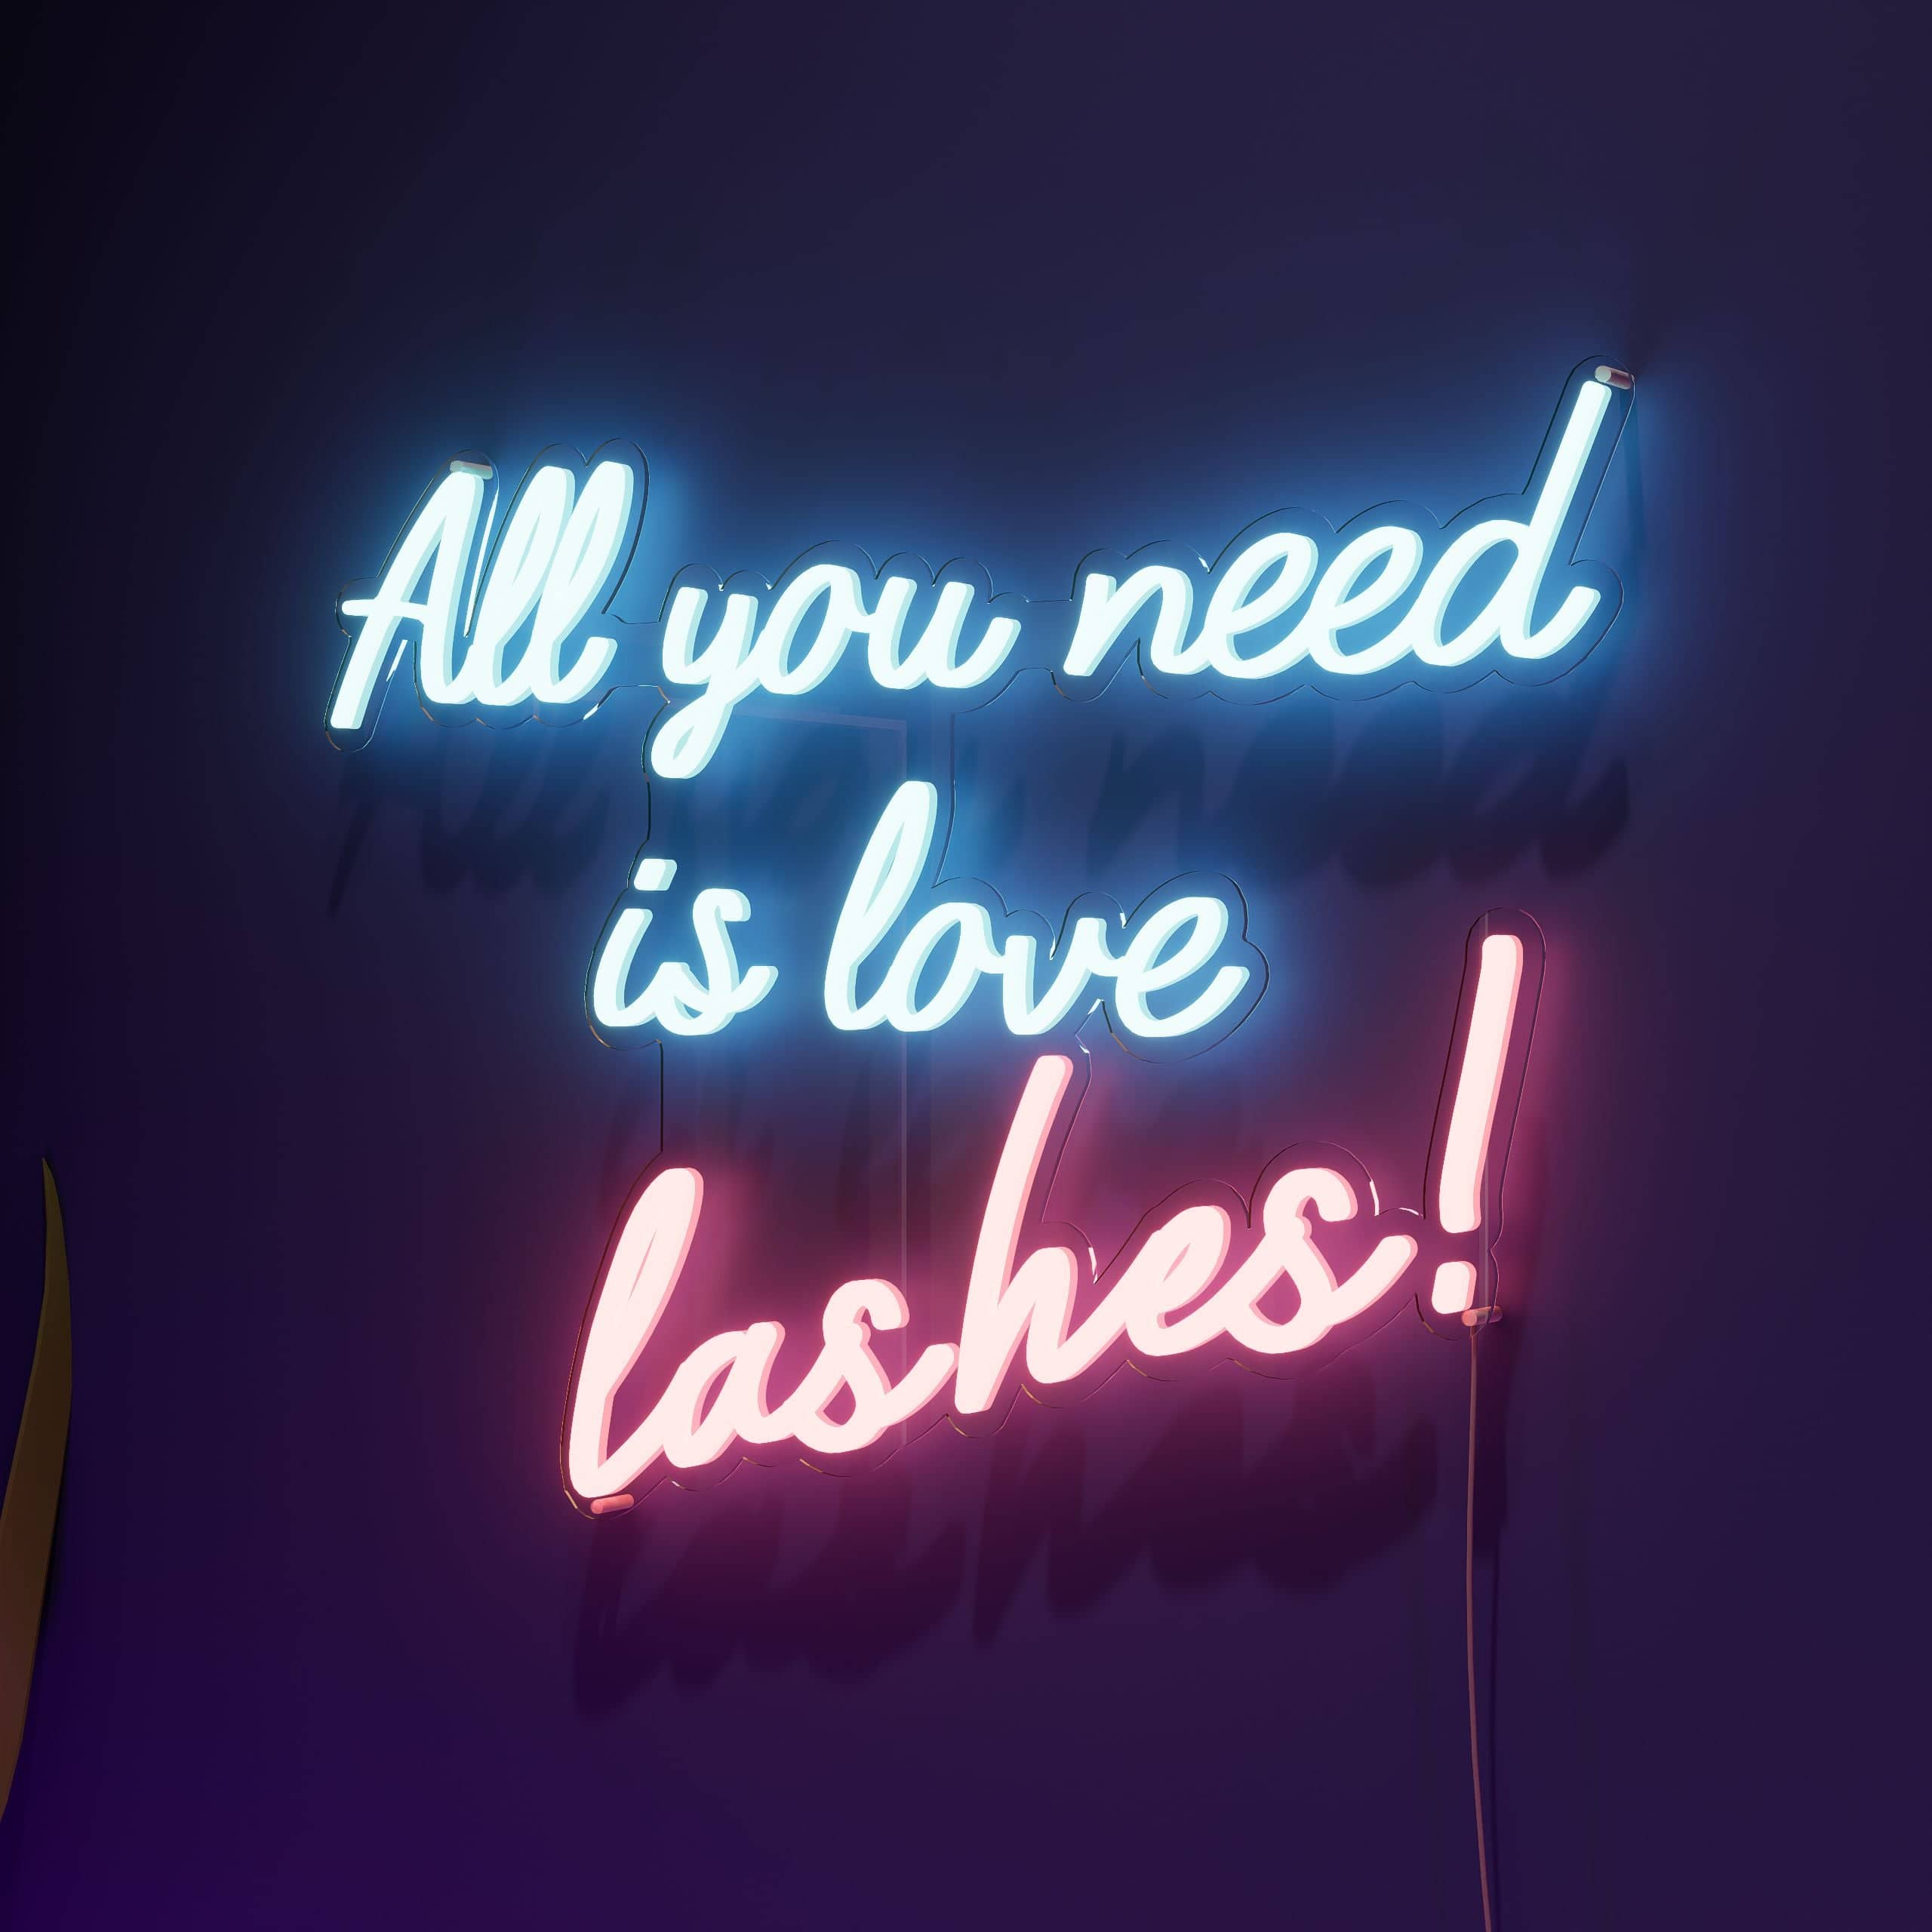 embrace-the-power-of-glamorous-lashes!-neon-sign-lite